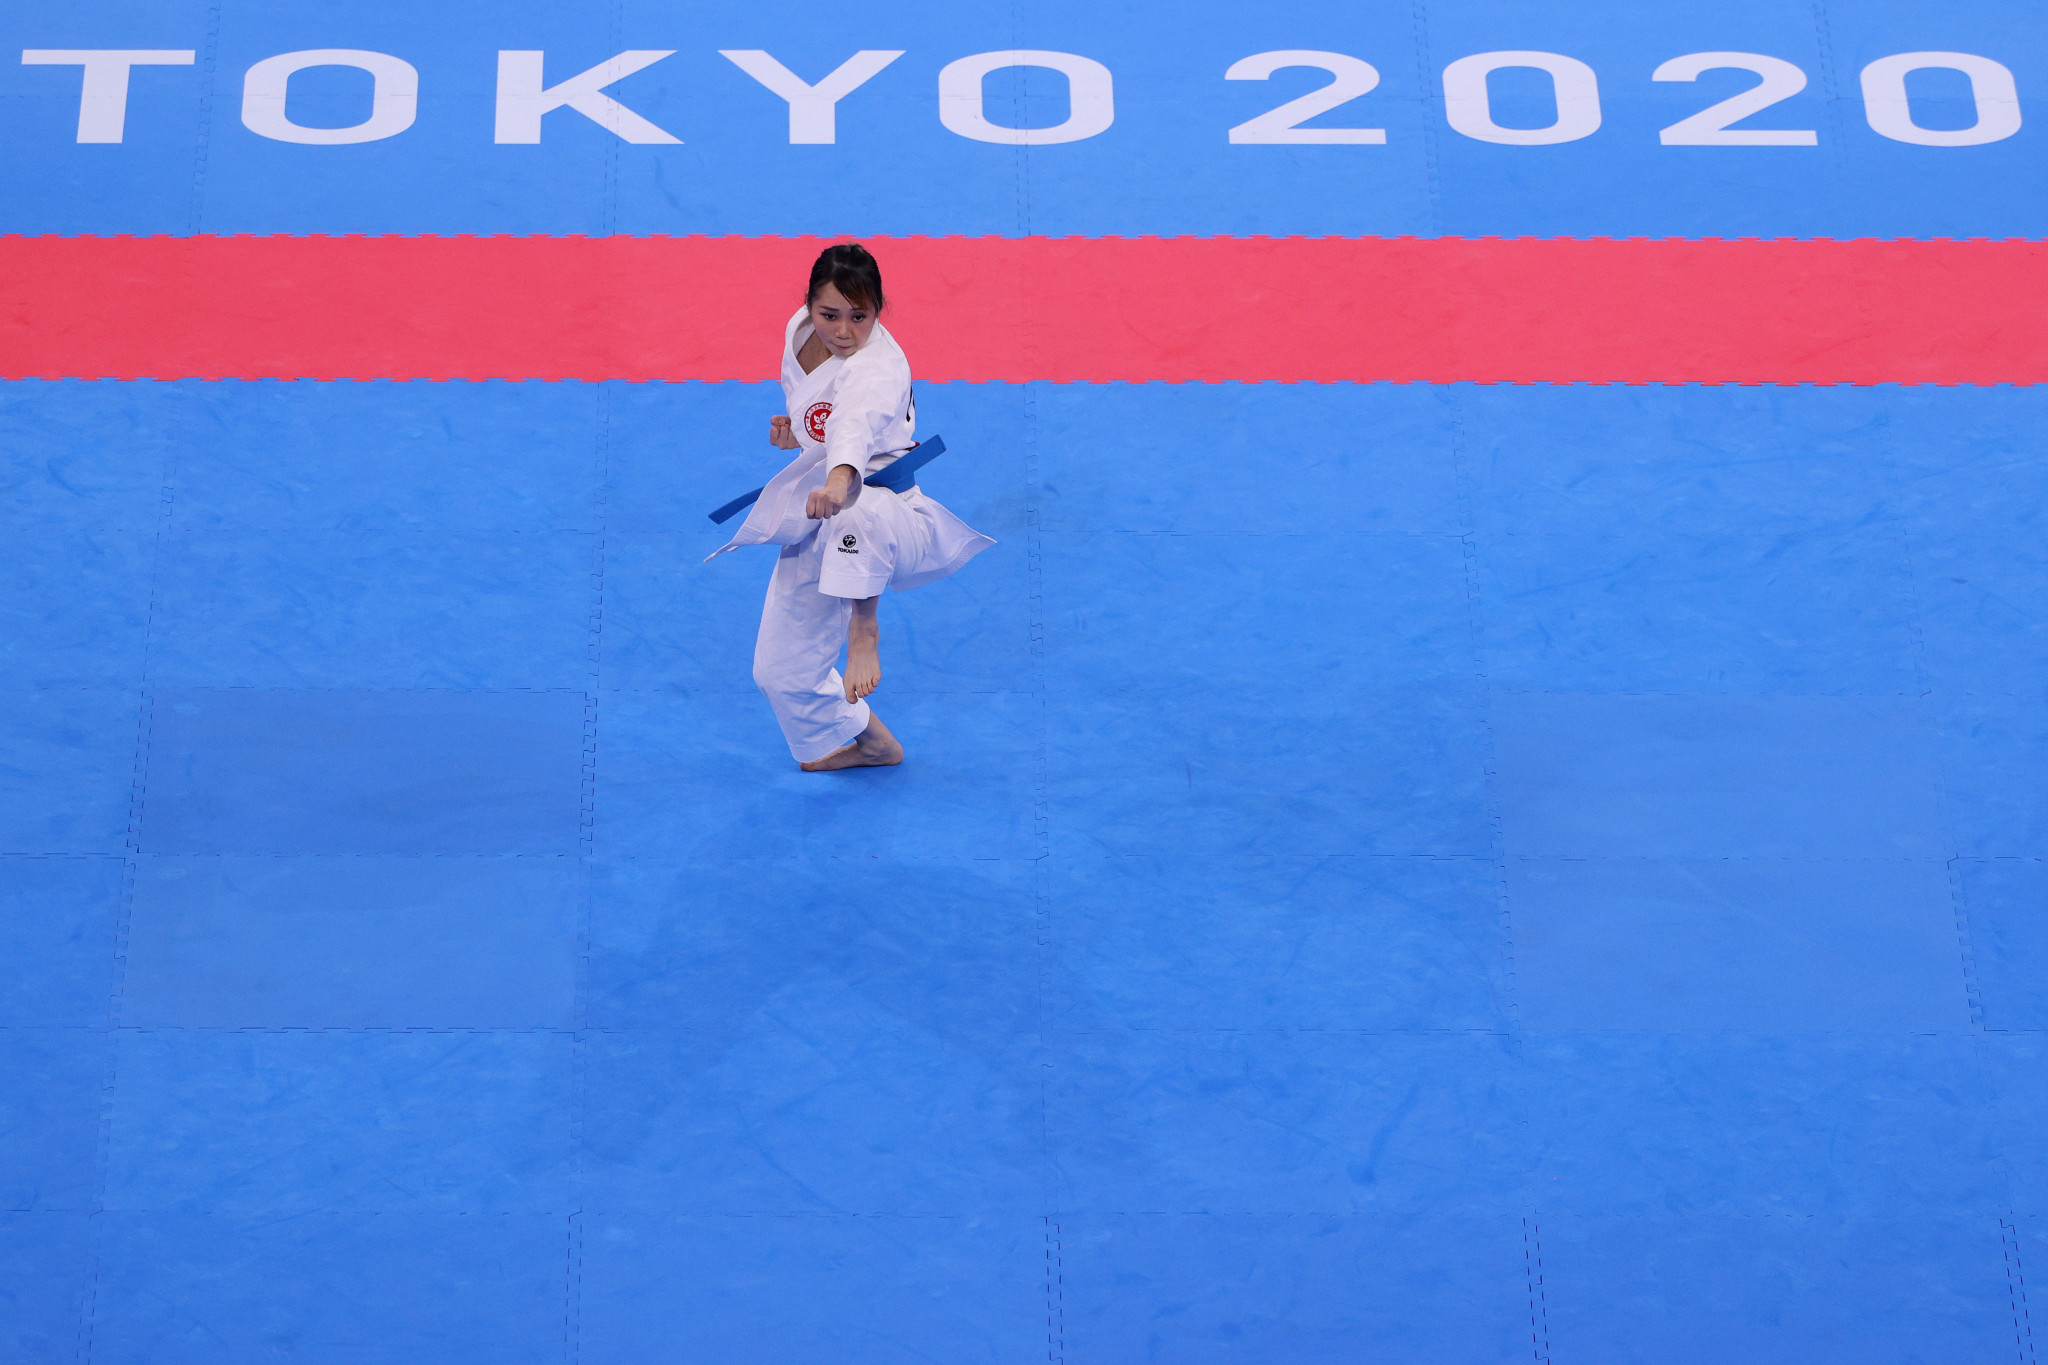 Grace Lau Mo-Sheung is set to be one of Hong Kong's big karate medal hopes at the Hangzhou 2022 Asian Games ©Getty Images